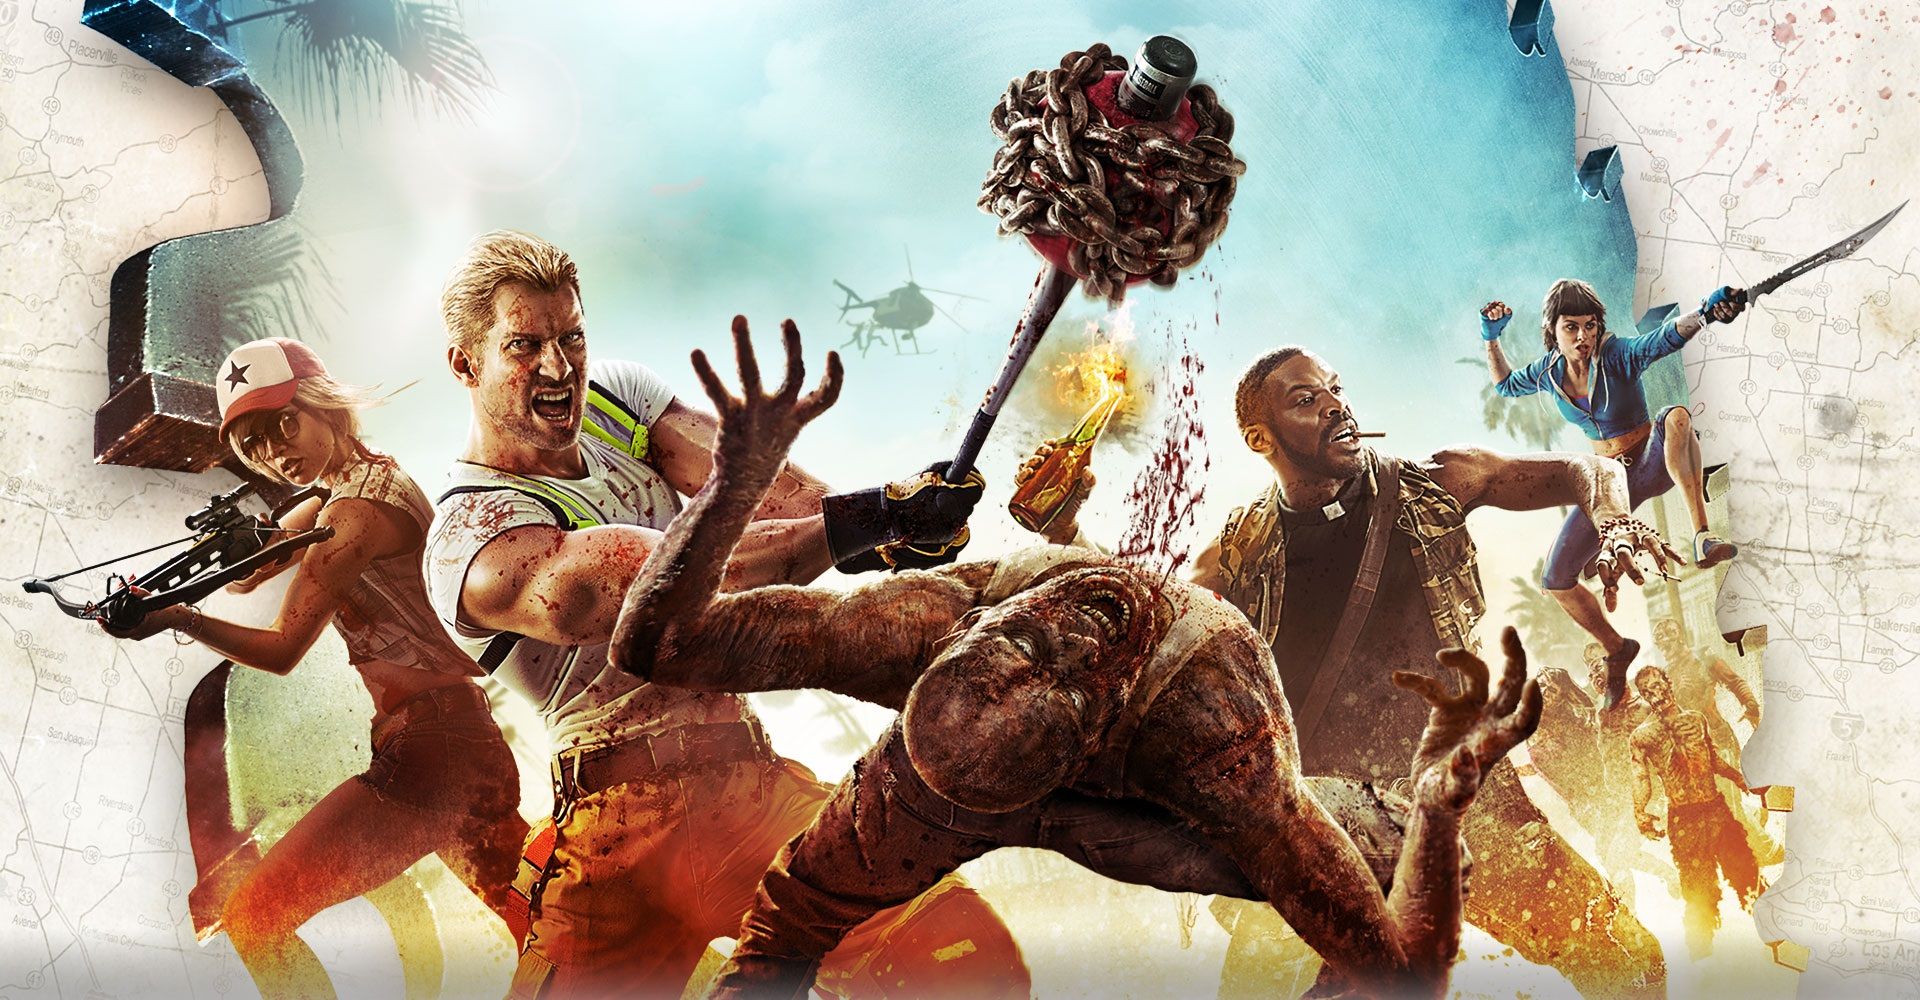 Dead Island 2 - PS4 - Release date to be announced